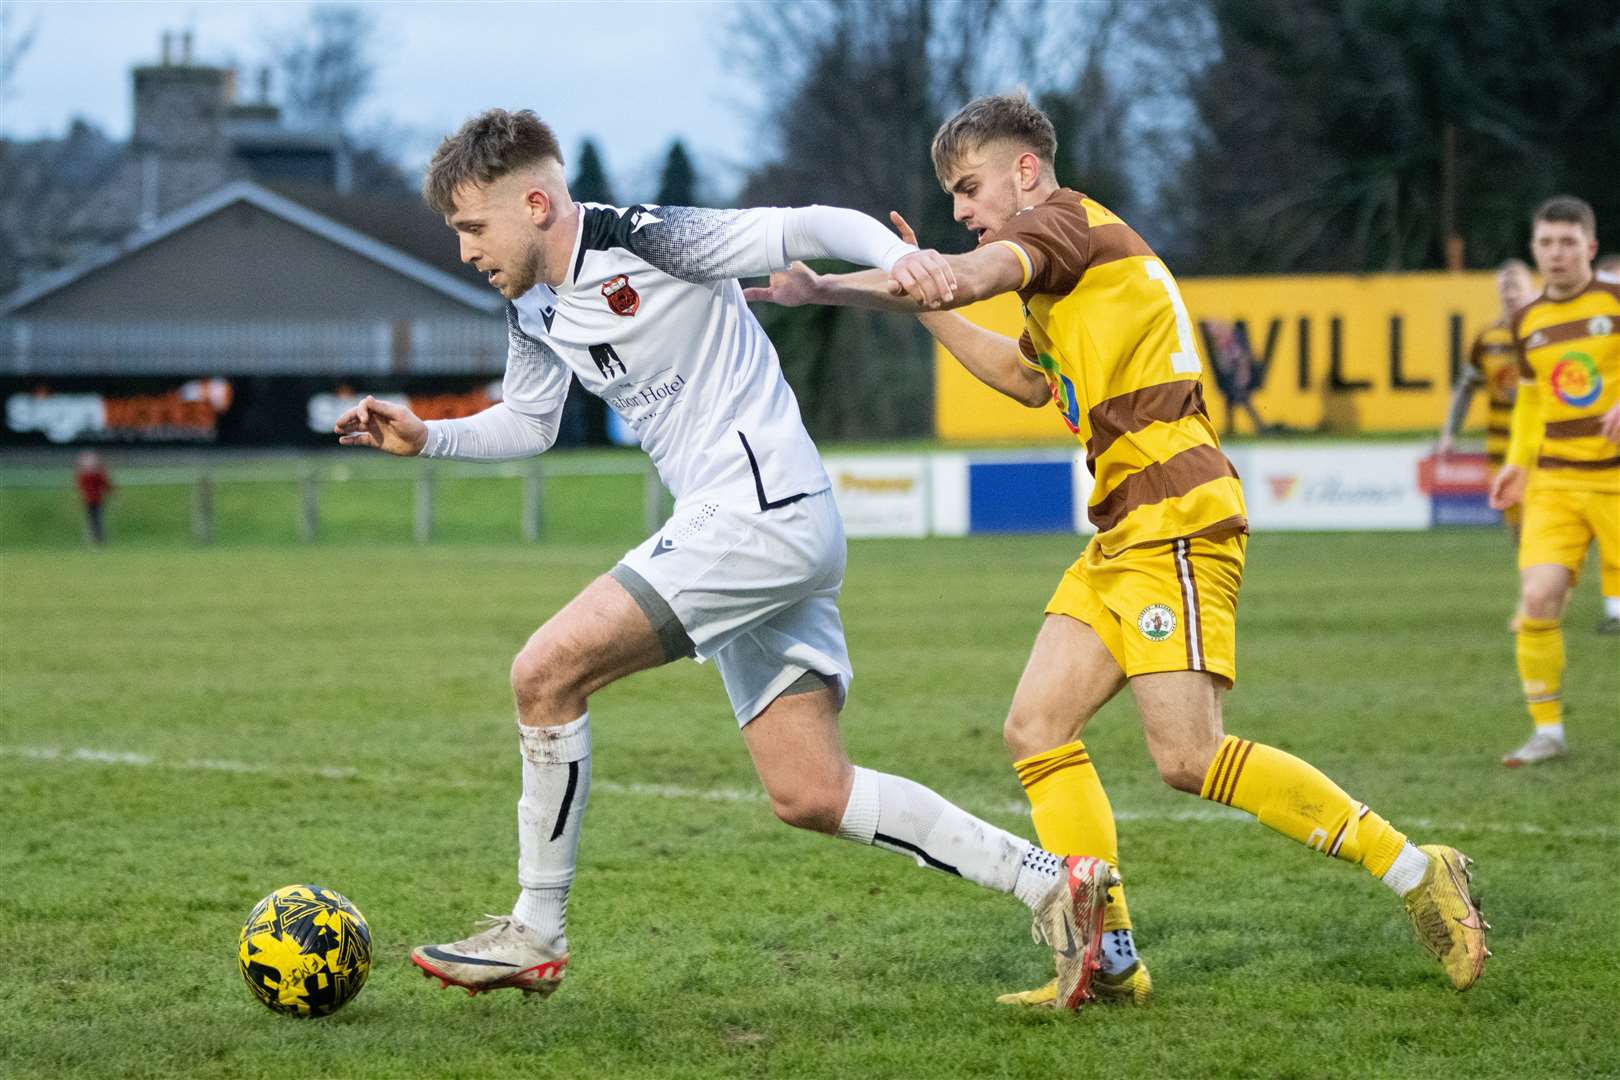 Rothes' Jake Thomson plays away from Forres full back Mark McLauchlan...Forres Mechanics FC (0) vs Rothes FC (1) - Highland Football League 23/24 - Mosset Park, Forres 25/11/2023...Picture: Daniel Forsyth..